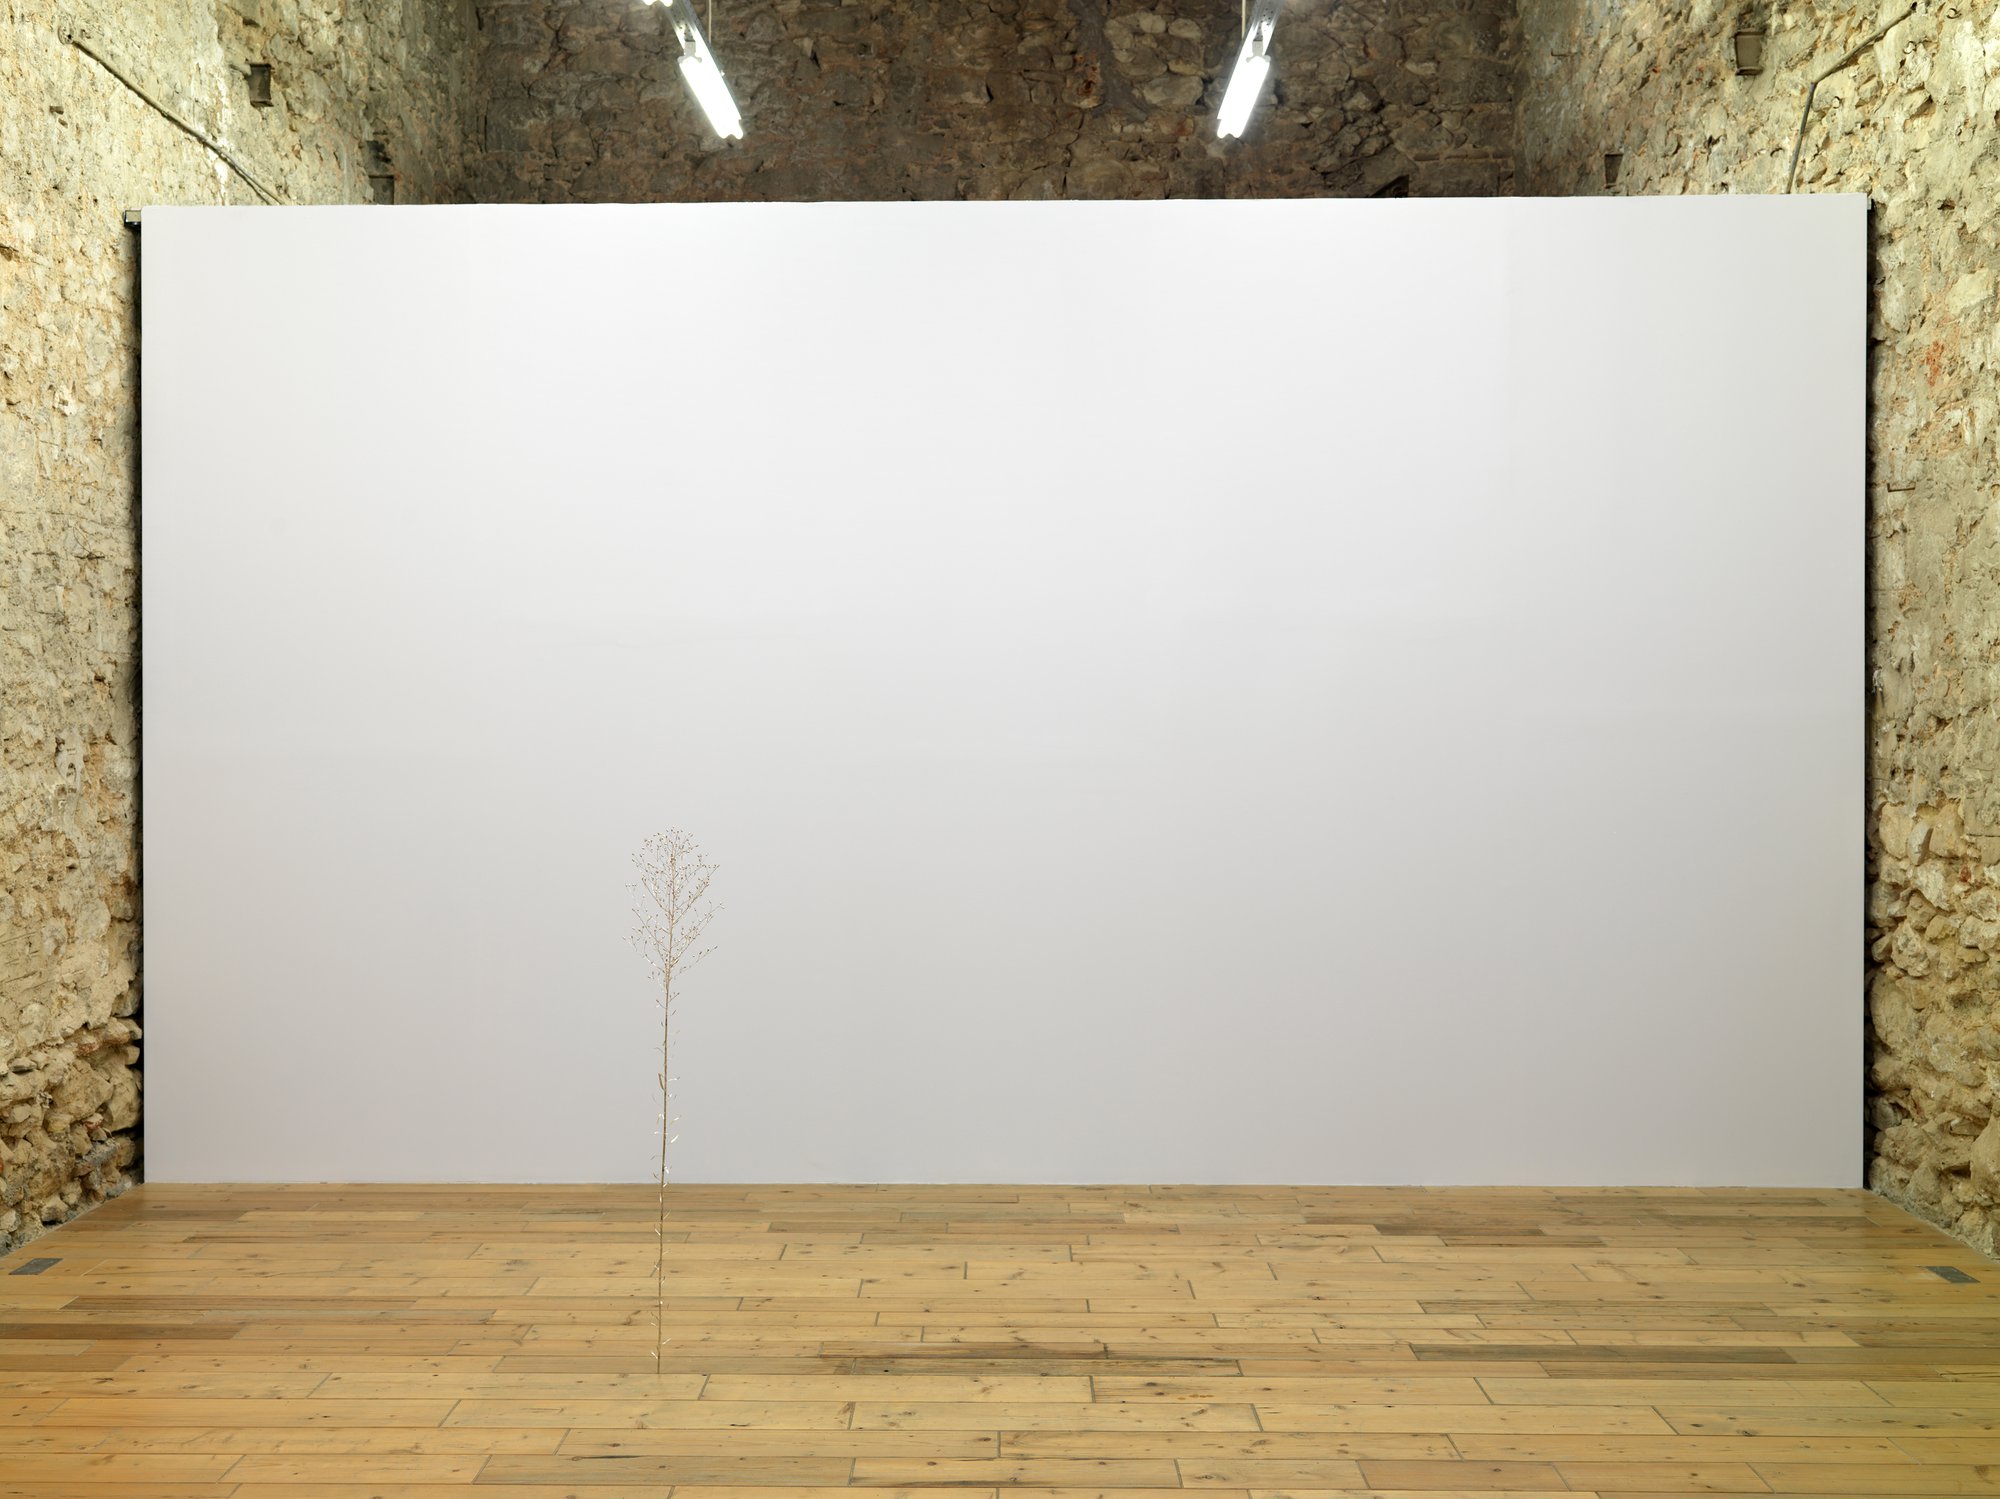 Installation view, Christodoulos Panayiotou, January, February, May, June, July, August, September, October, December, Rodeo, Piraeus, 2021